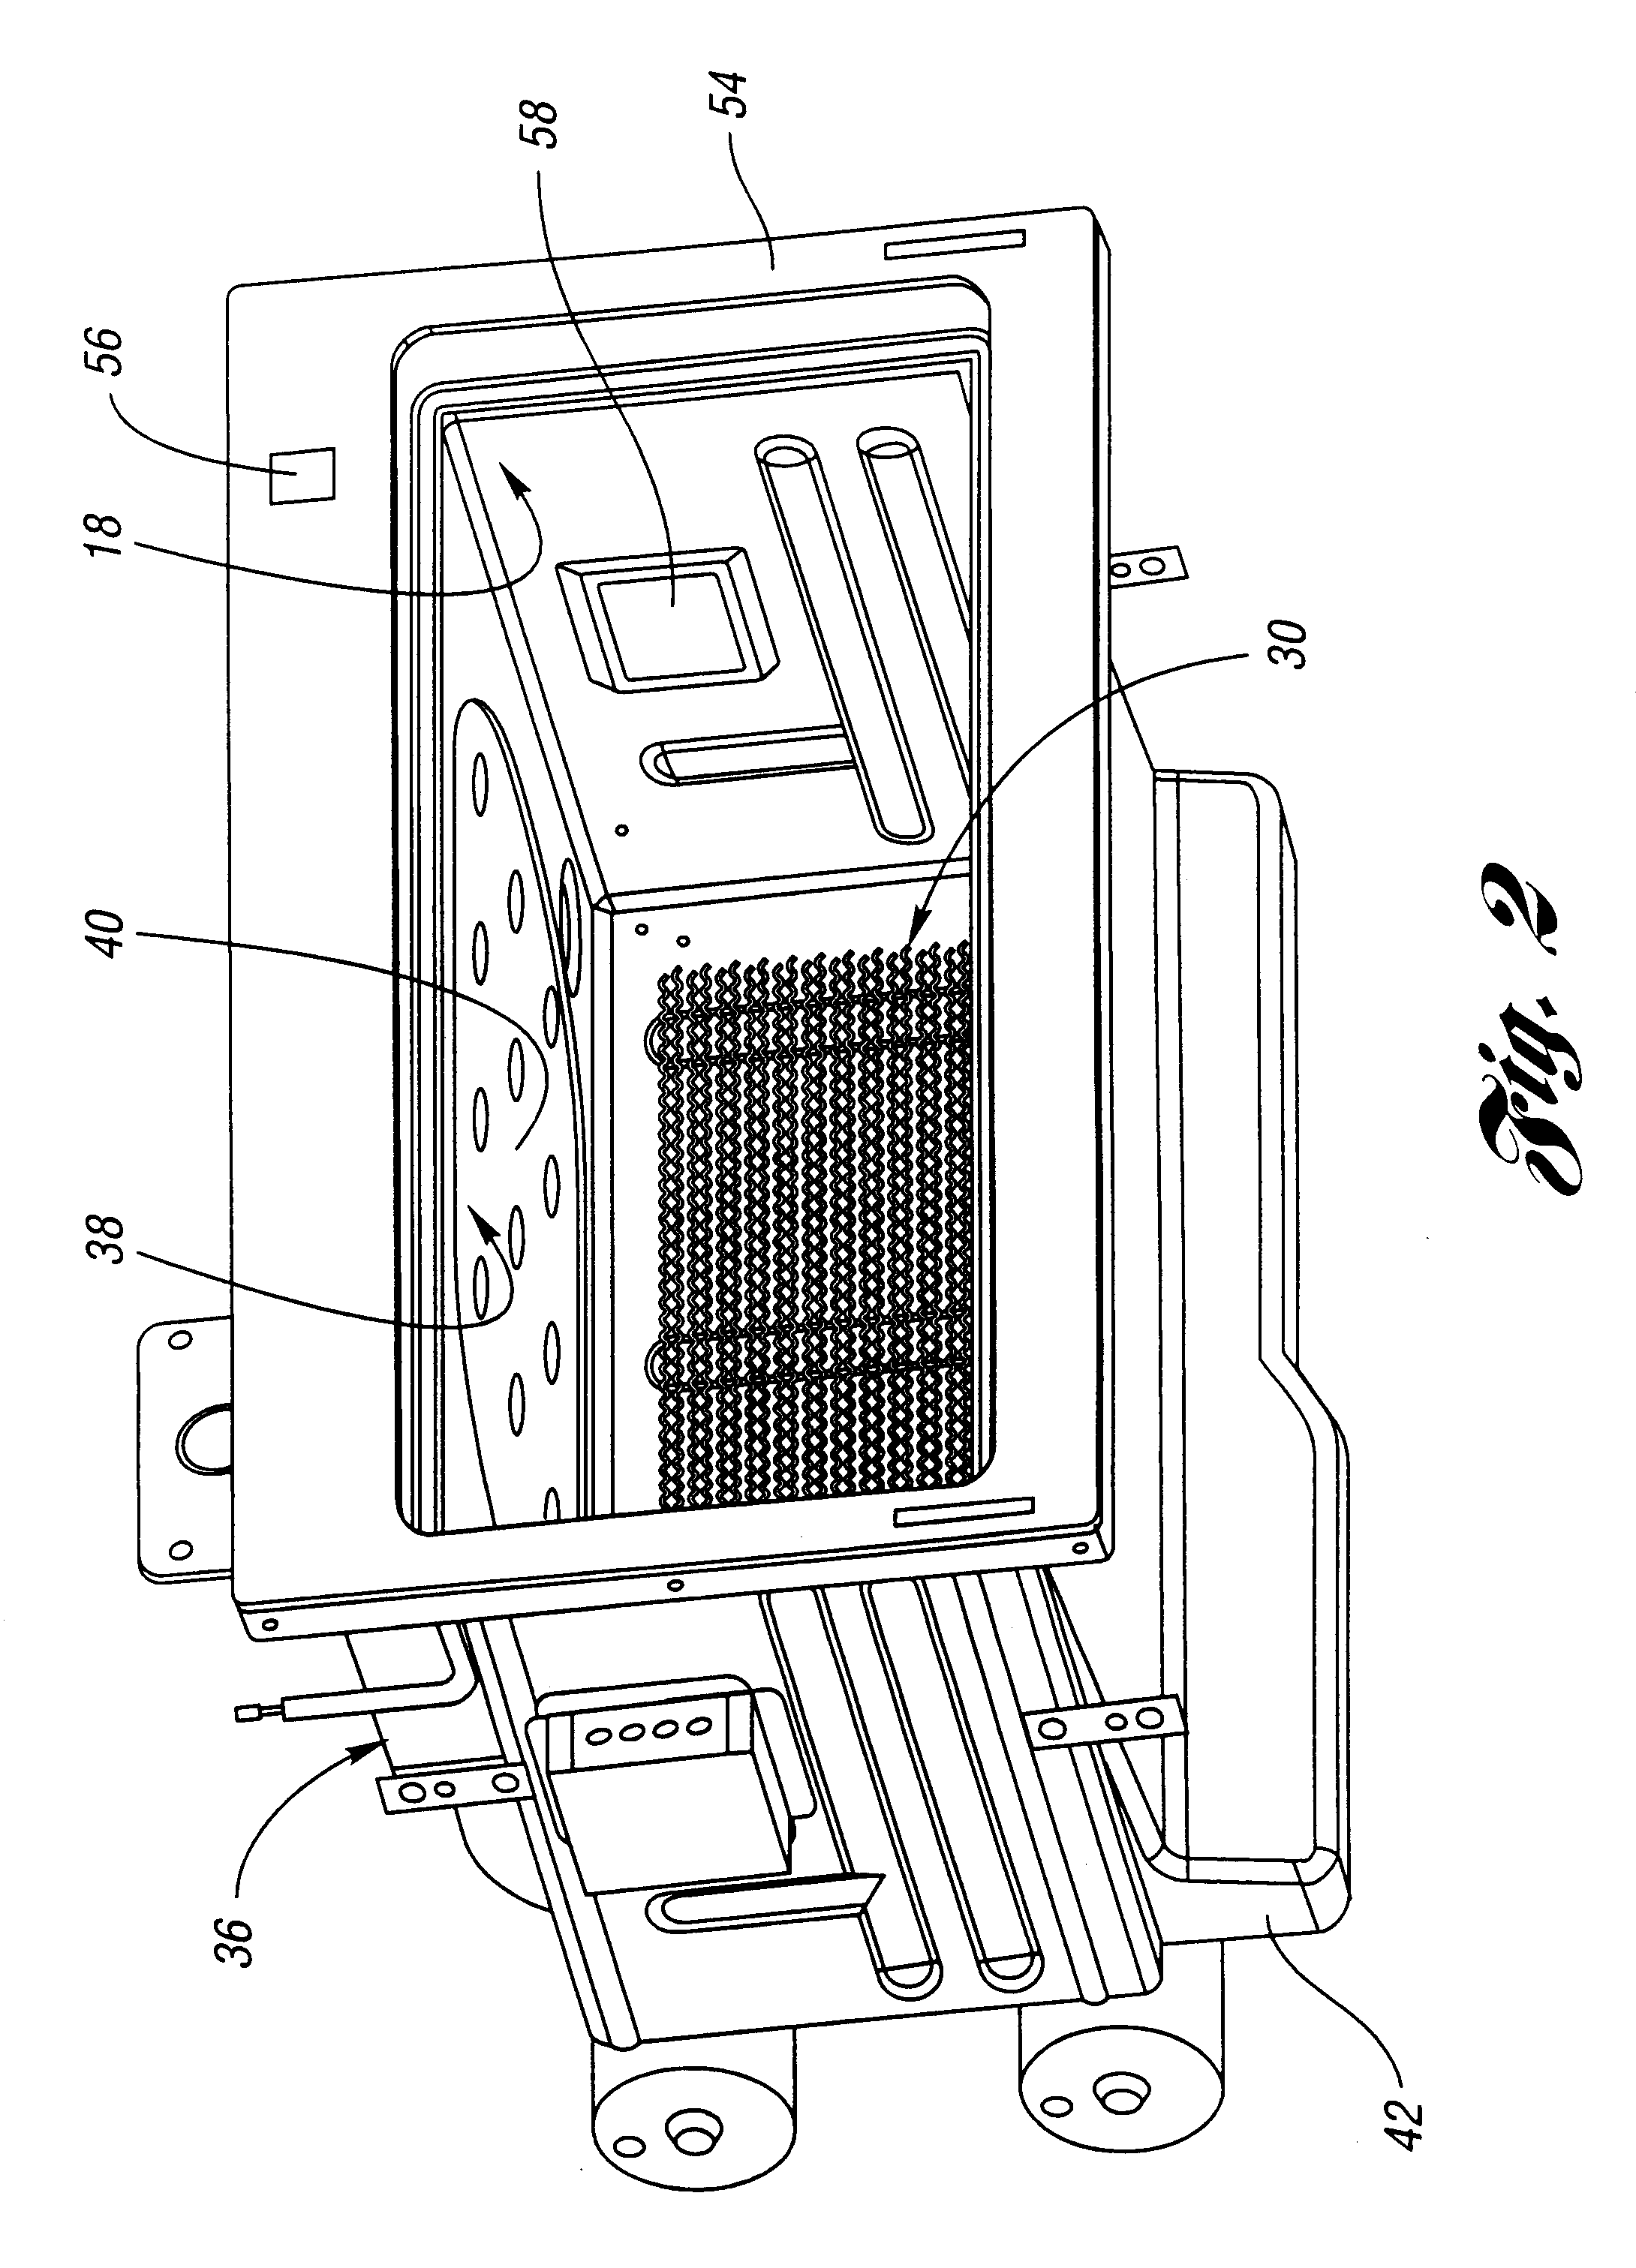 Multi-stage self-cleaning control for oven